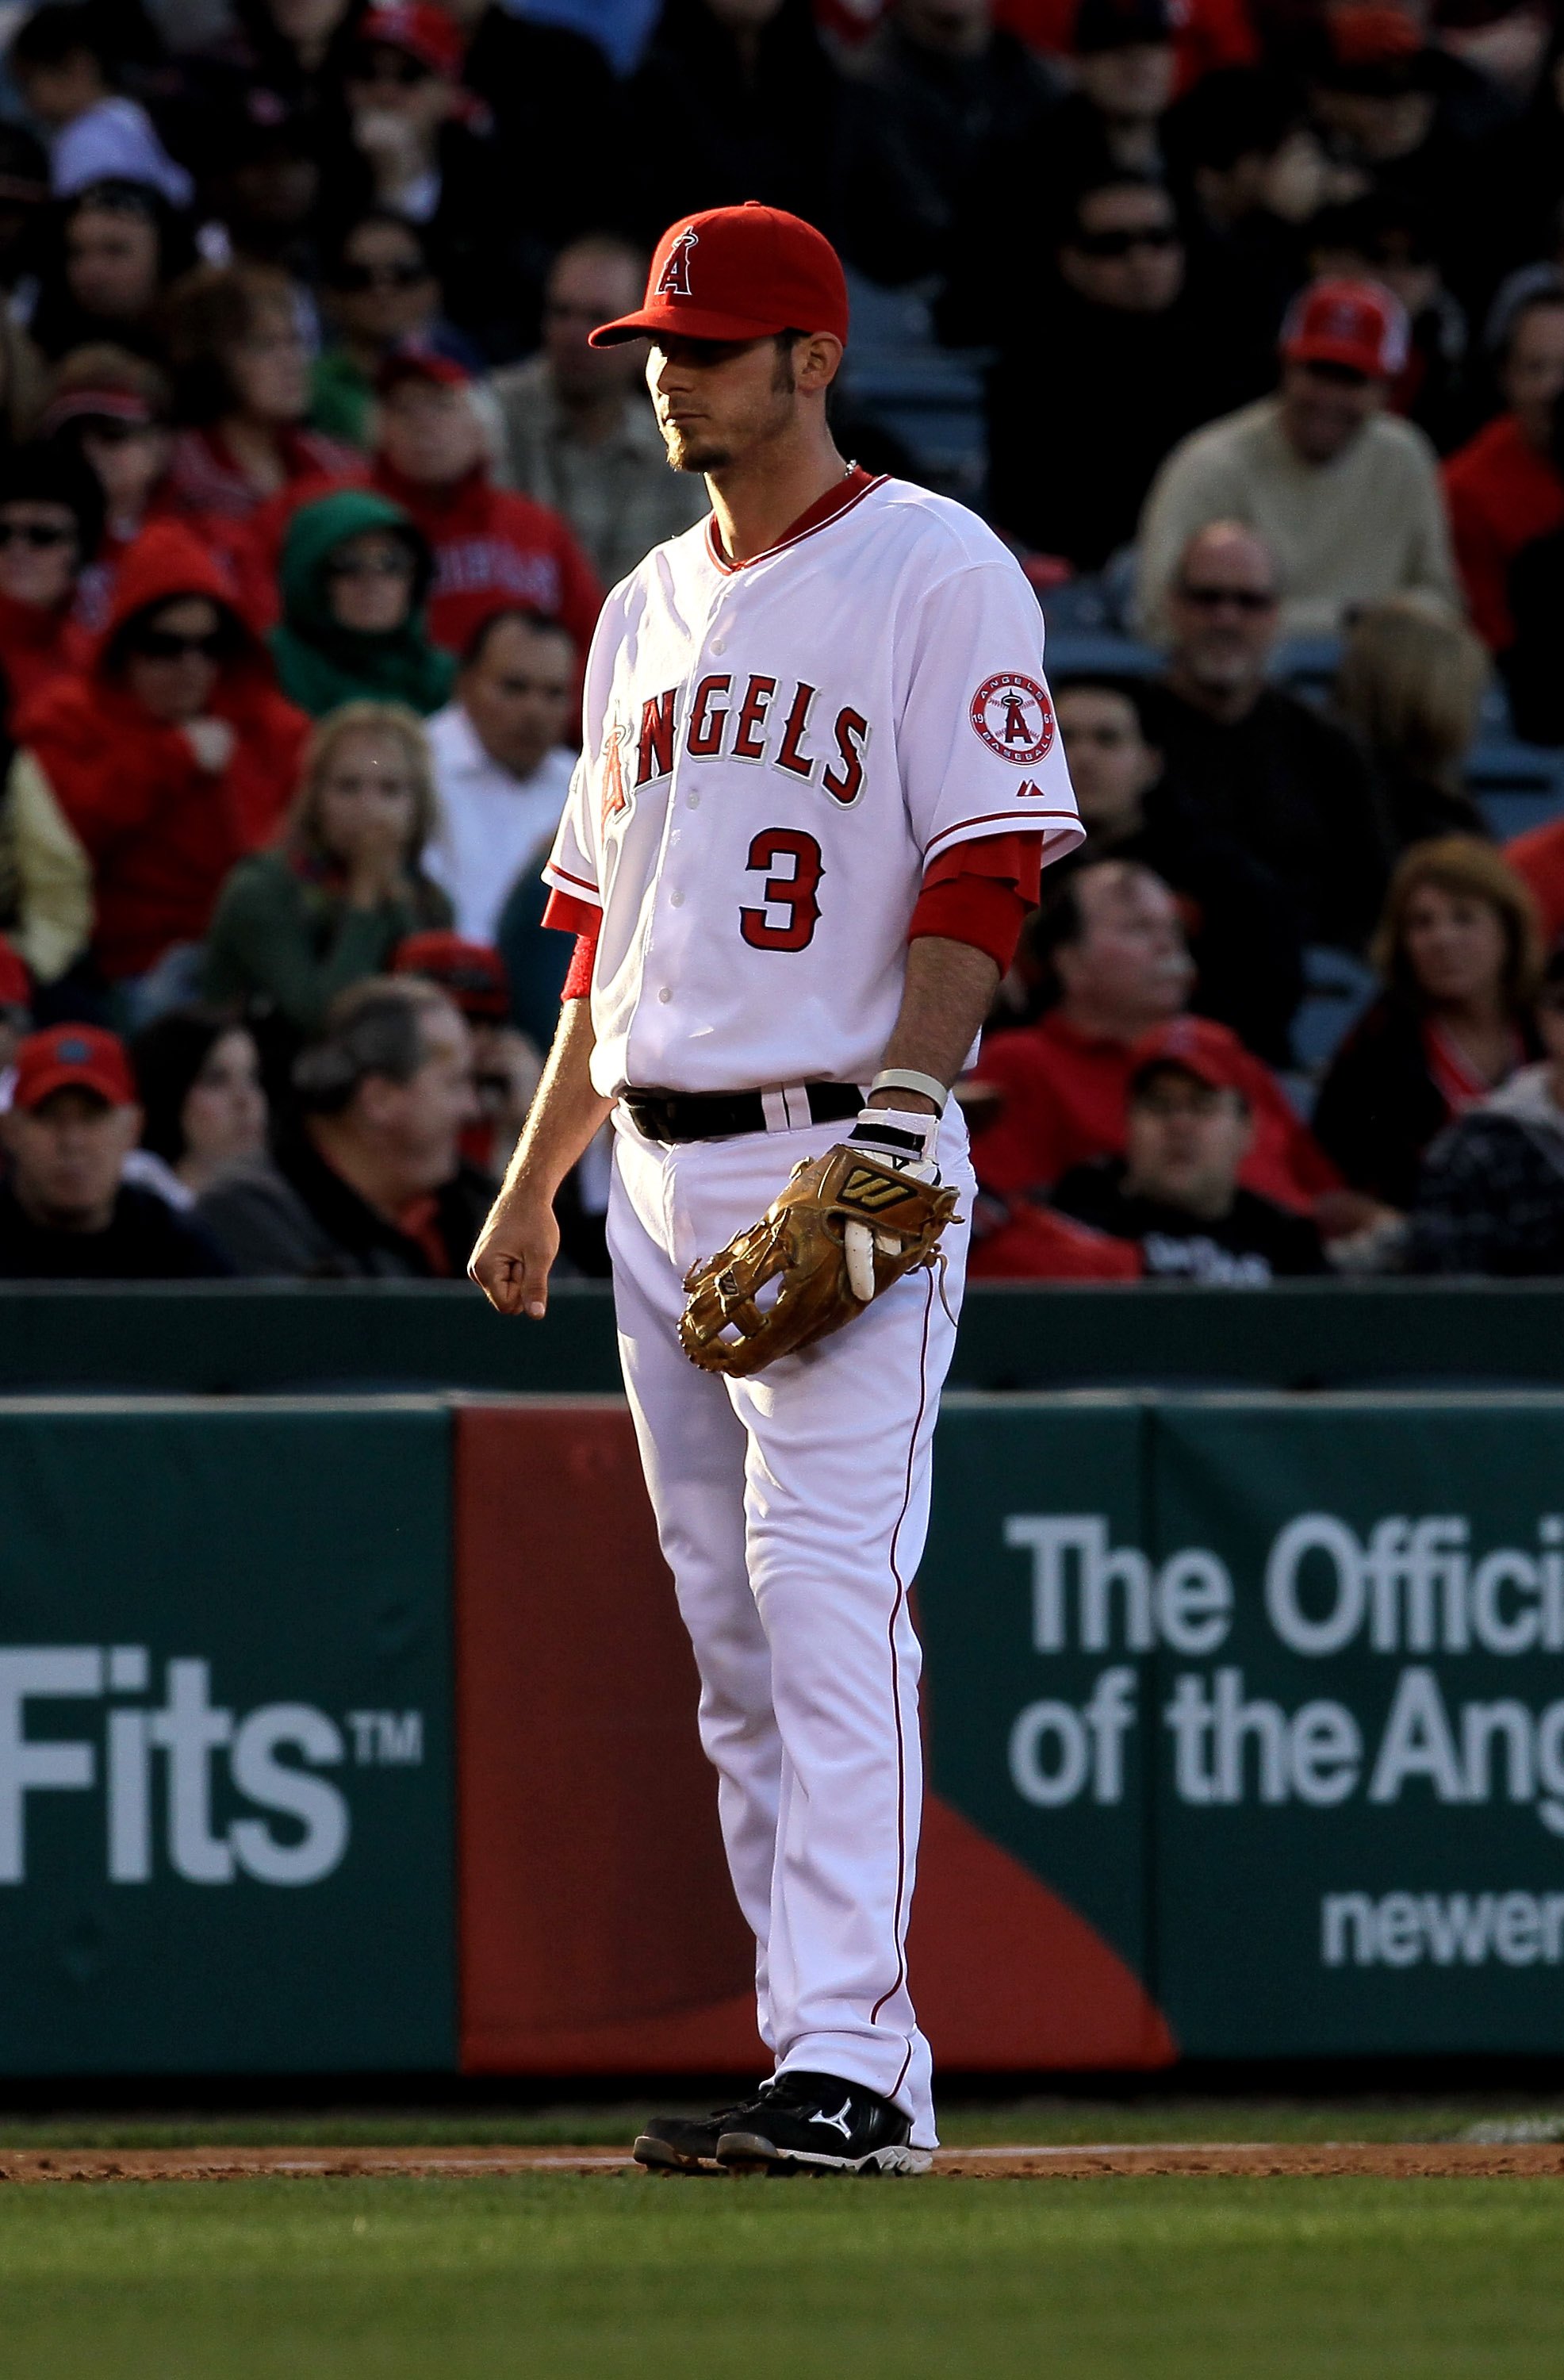 ANAHEIM, CA - APRIL 28:  Third baseman Brandon Wood #3 of the Los Angeles Angels of Anaheim stands in the the infield in the game against the Cleveland Indians on April 28, 2010 at Angel Stadium in Anaheim, California.  The Angels won 4-3.  (Photo by Step